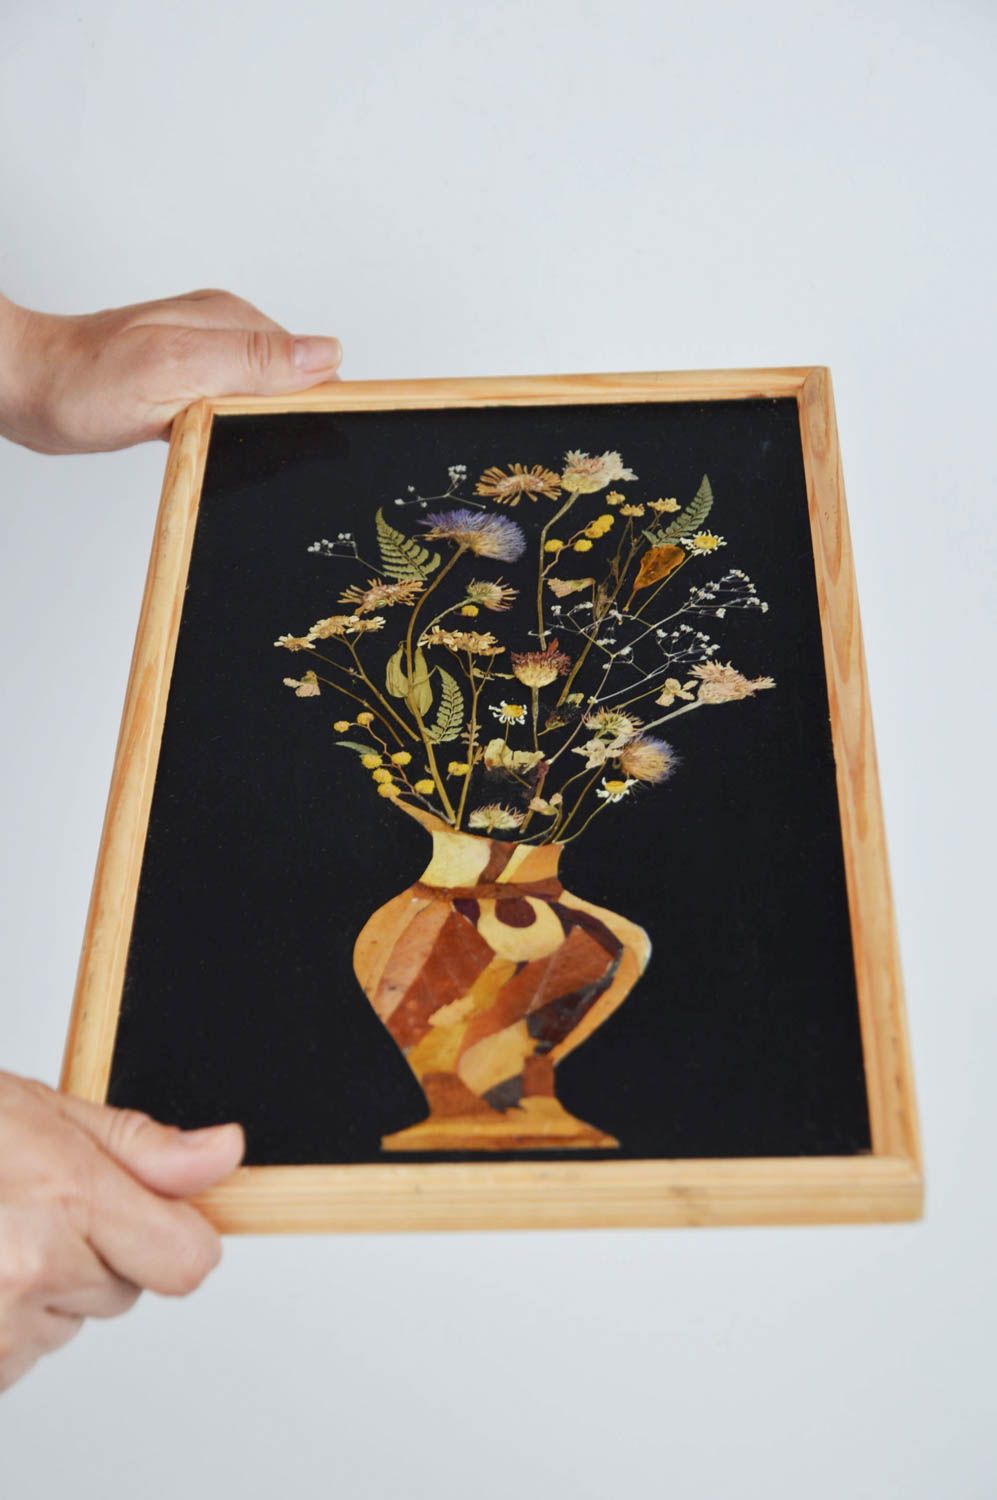 Picture made of dried leaves and flowers handmade still life vase with flowers photo 3